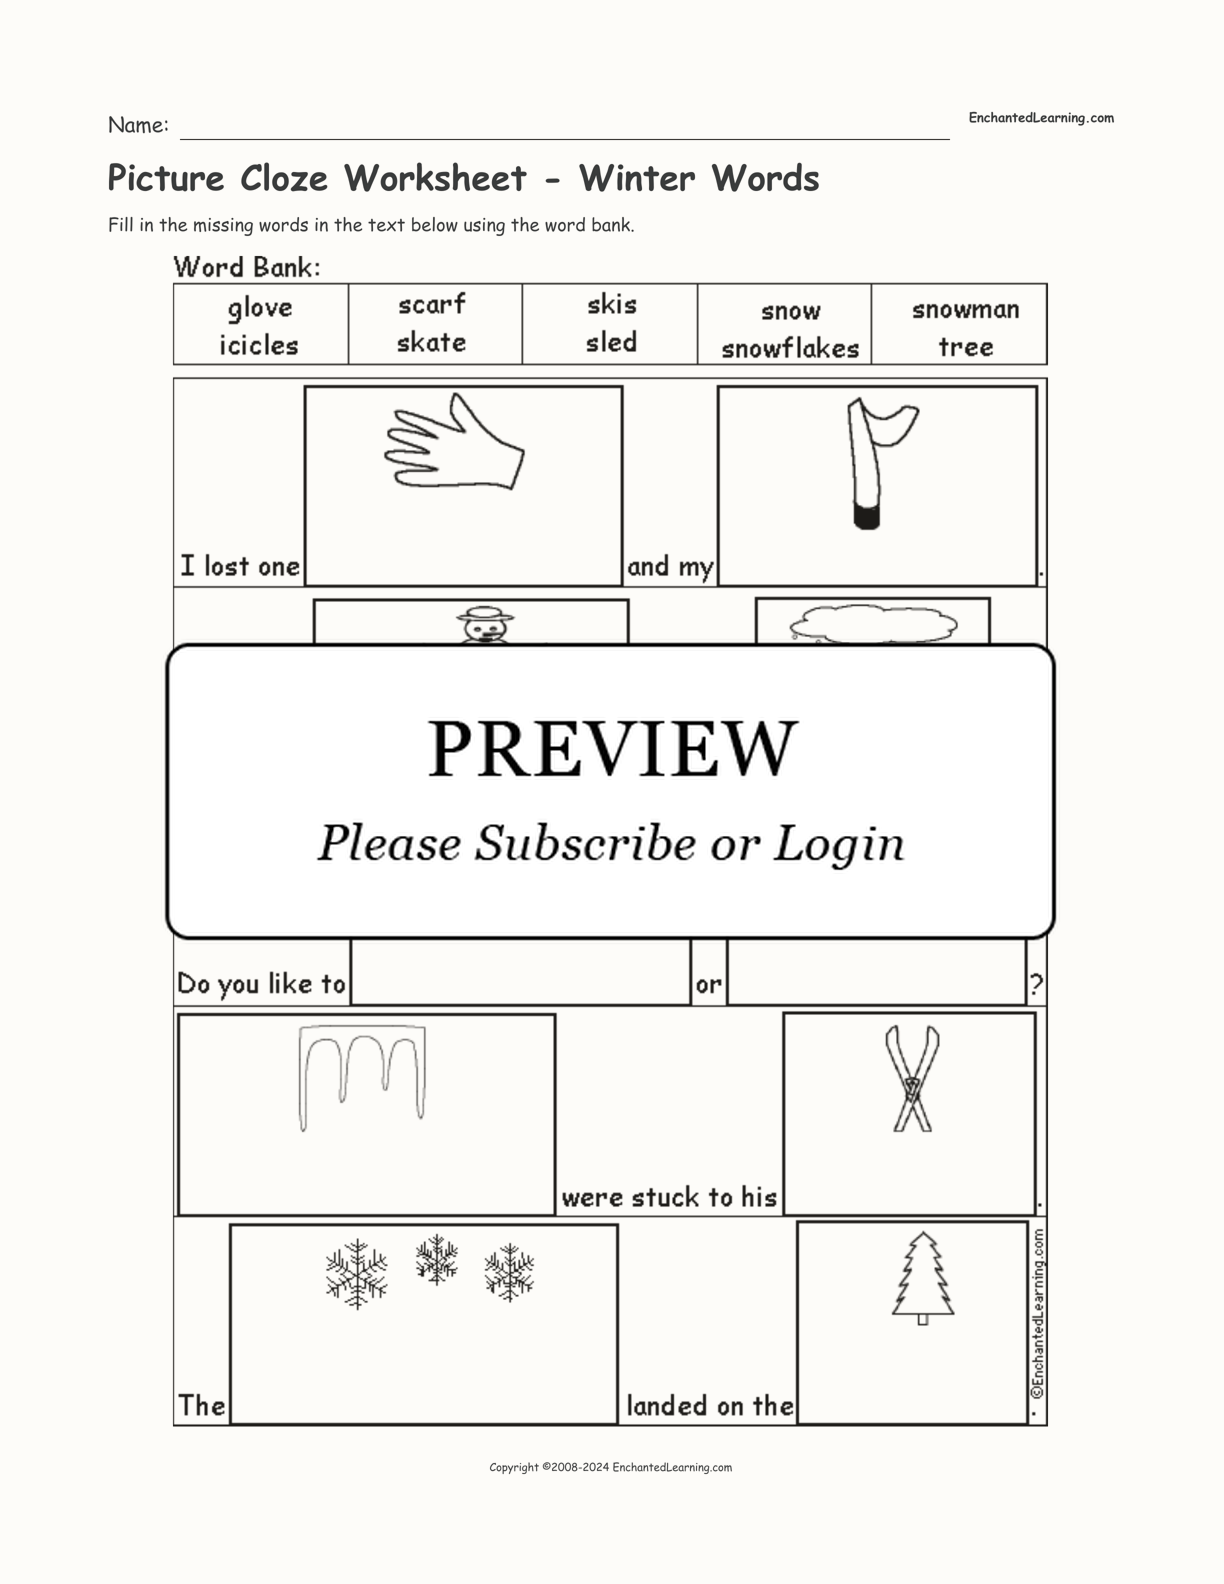 Picture Cloze Worksheet - Winter Words interactive worksheet page 1